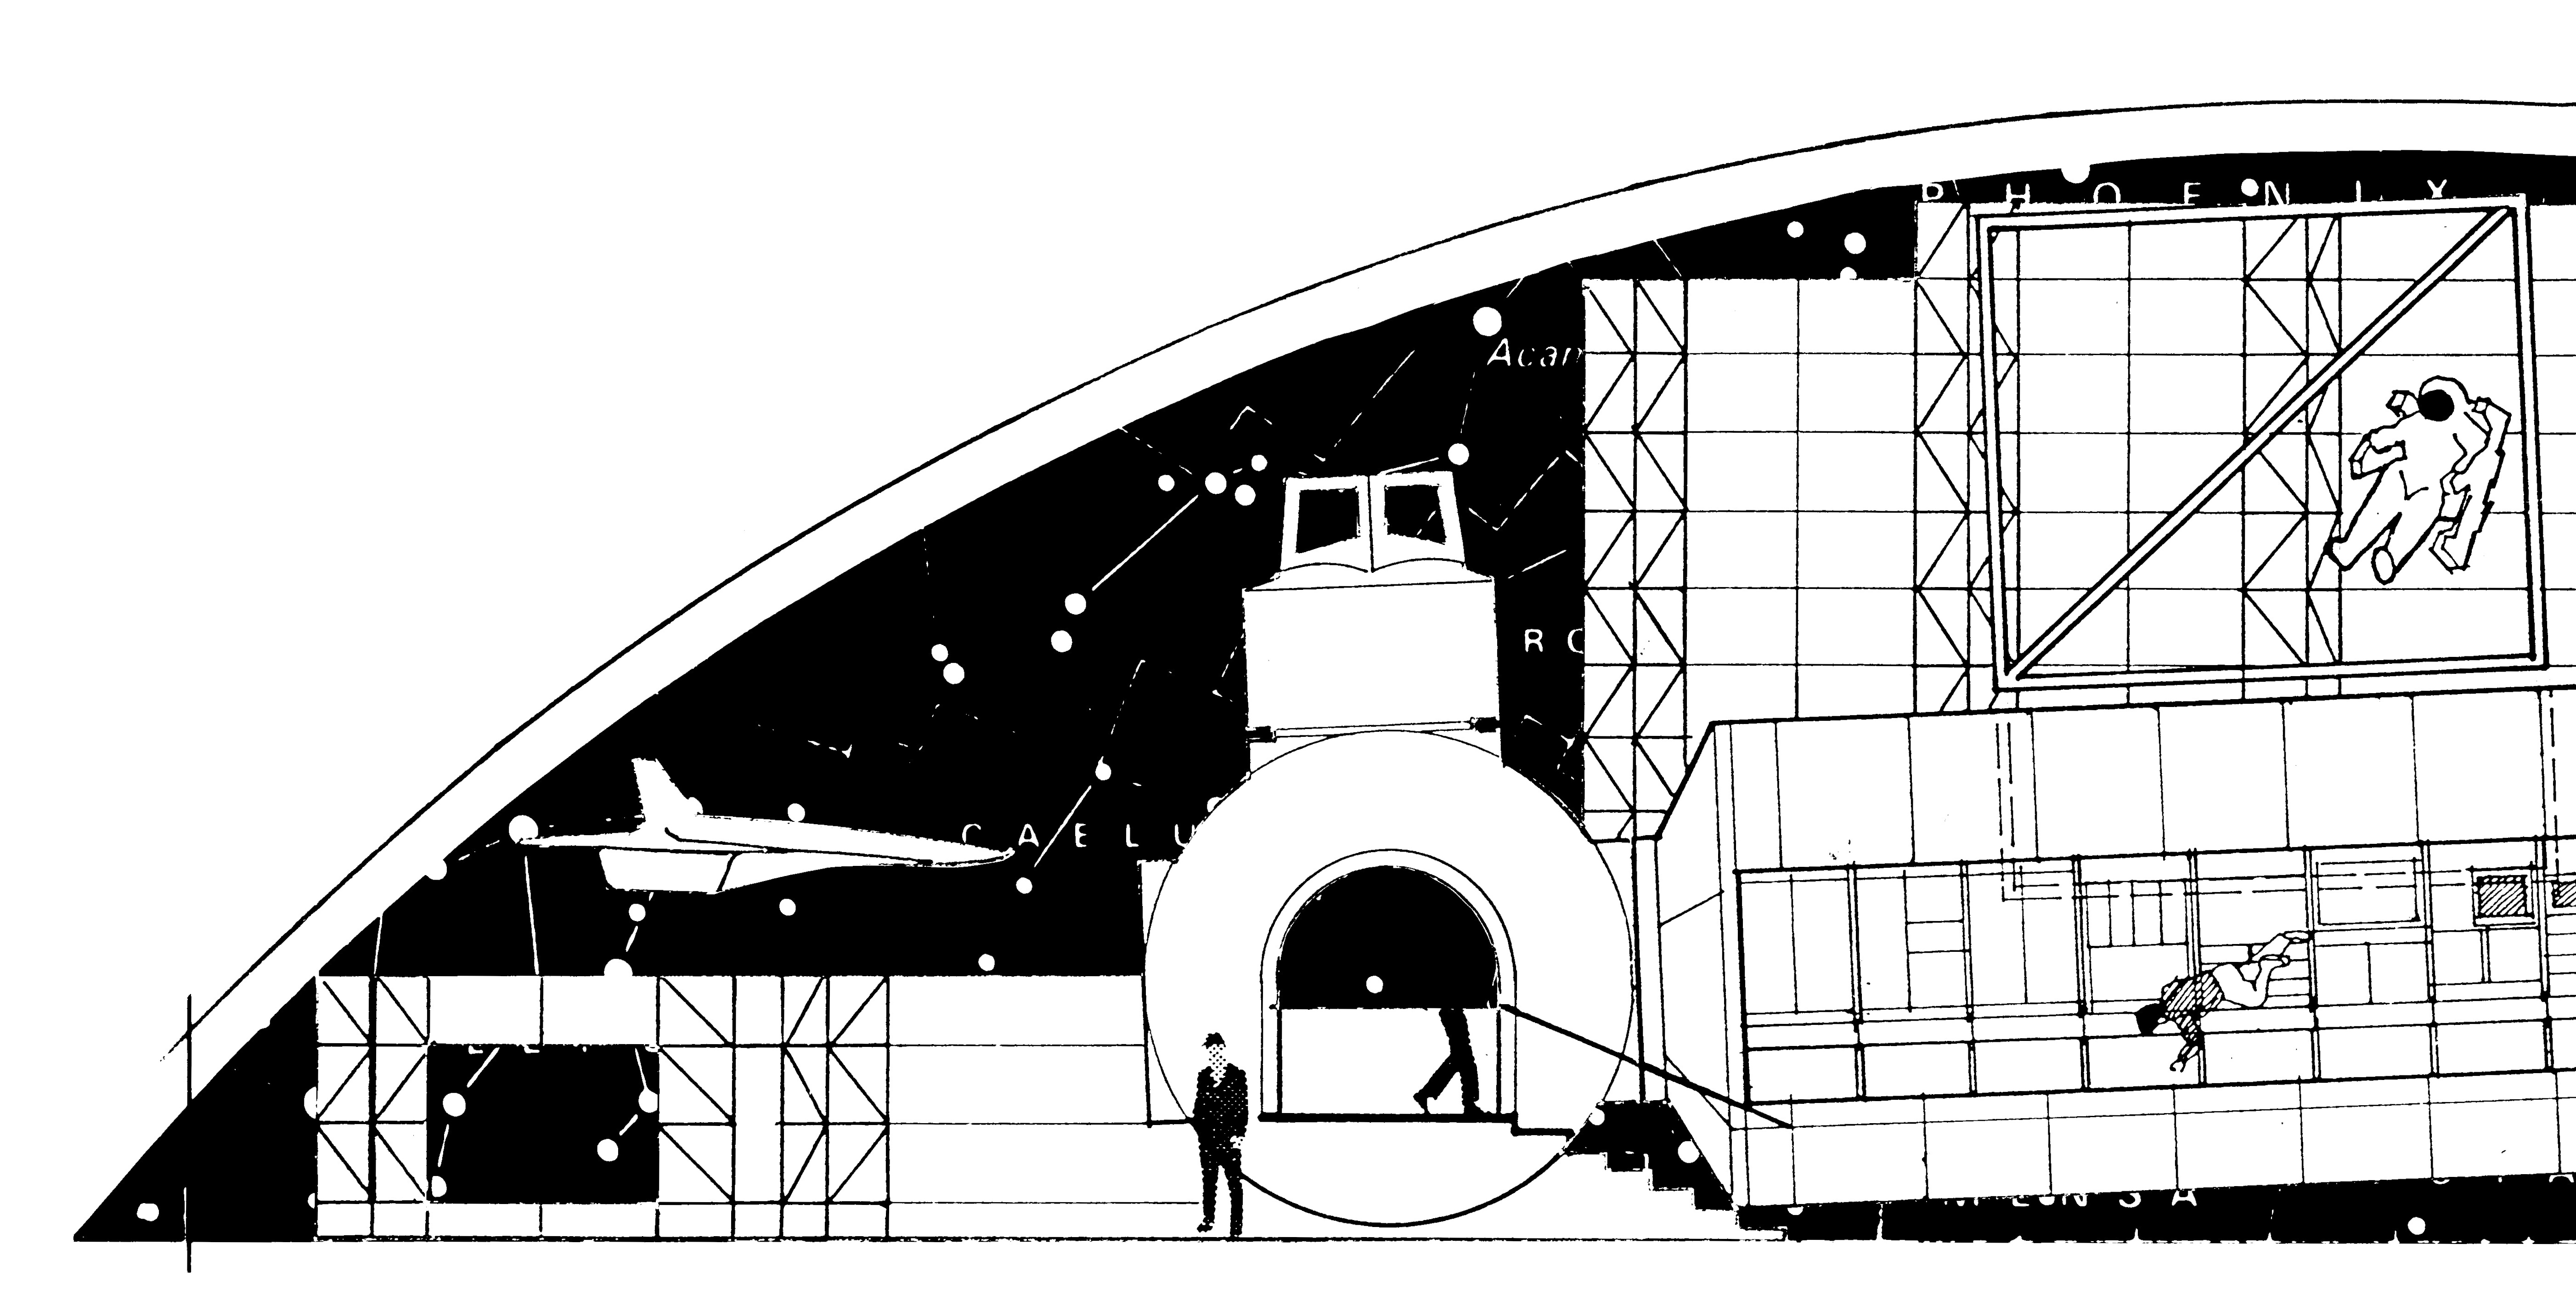 Sketch of the inside of the exhibit at ground level with the dome above it, left.